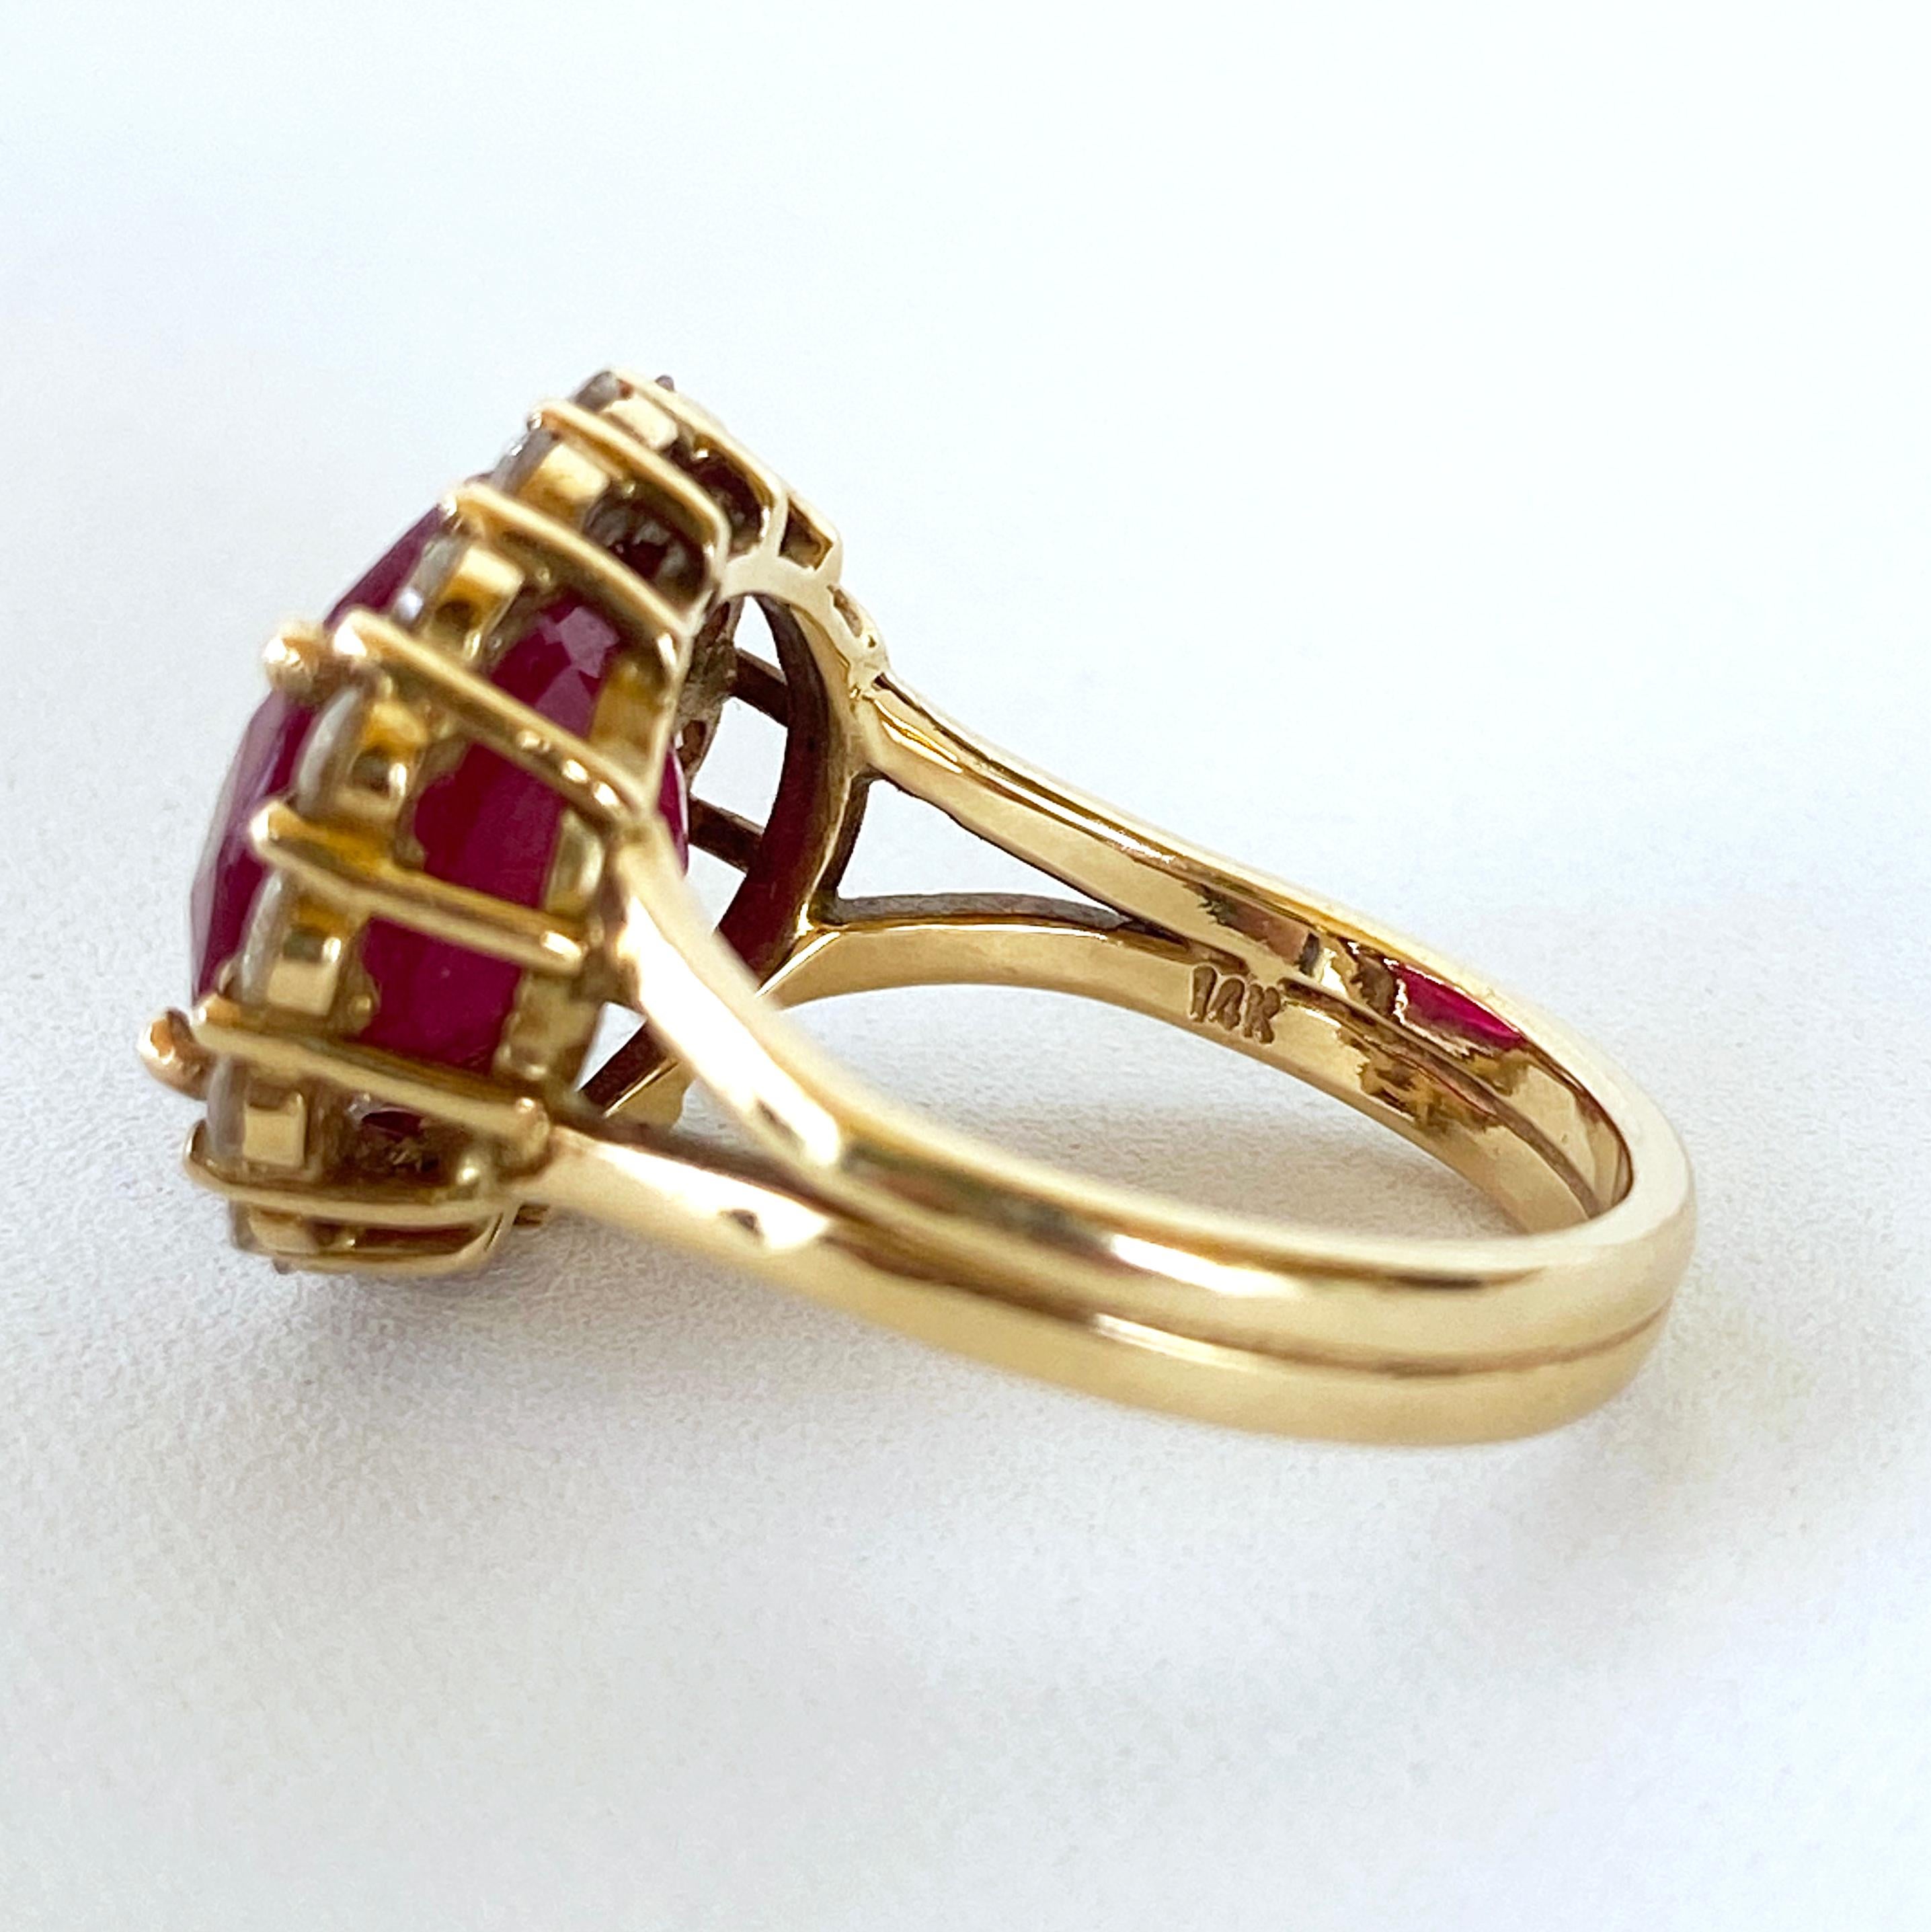 Brilliant ring by Marina J. This stunning piece features a large faceted Ruby, displaying a vivid Red / Deep Fuchsia tone. Due to its semi translucent nature, the Ruby radiates magnificent color when hit with light. Set in solid 14k Yellow Gold, The